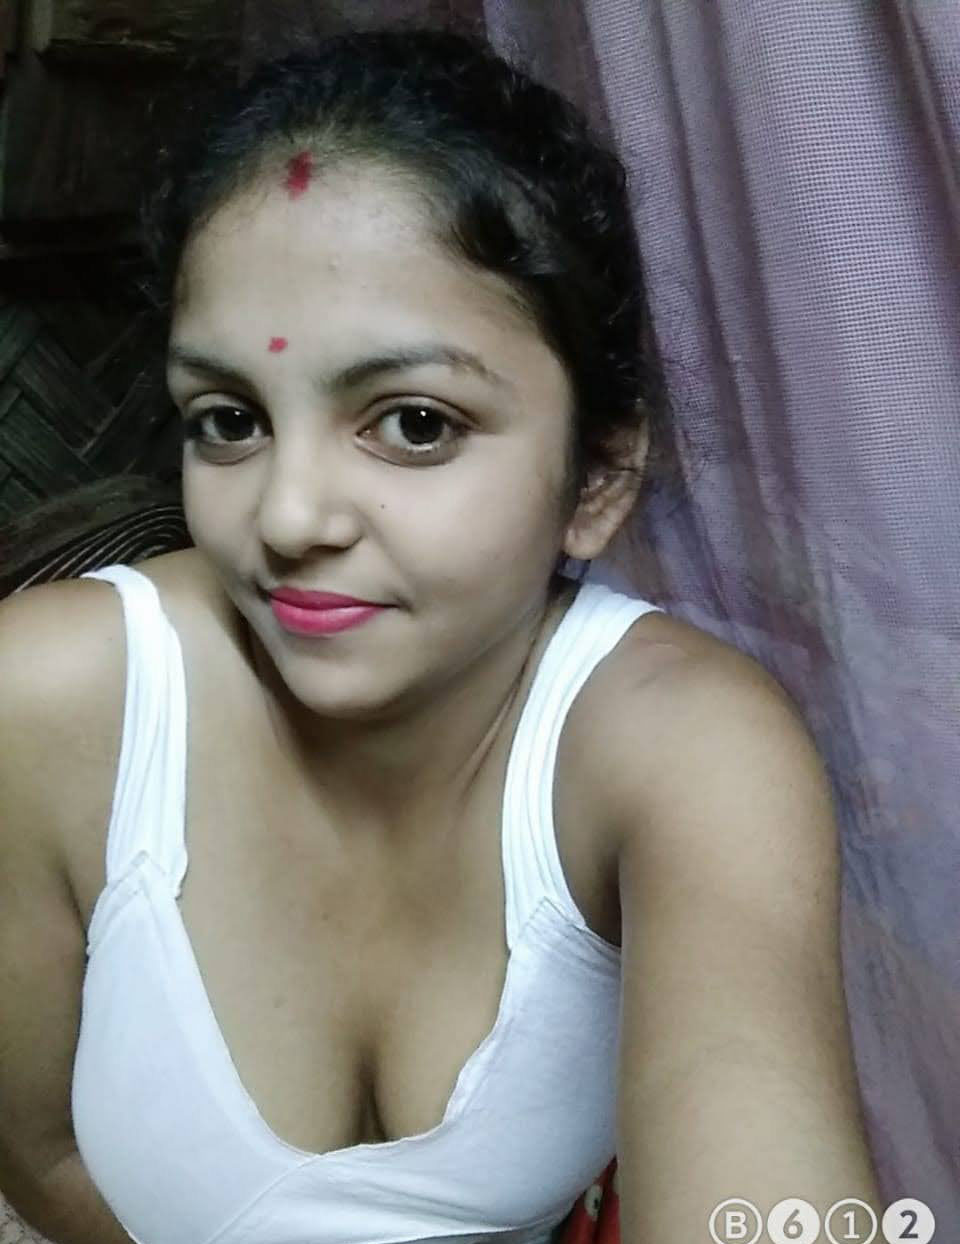 Indian Babe Nude Selfie - Juicy Indian Girl Nude Selfie Pictures GF Naked Photo, big tits, pussy